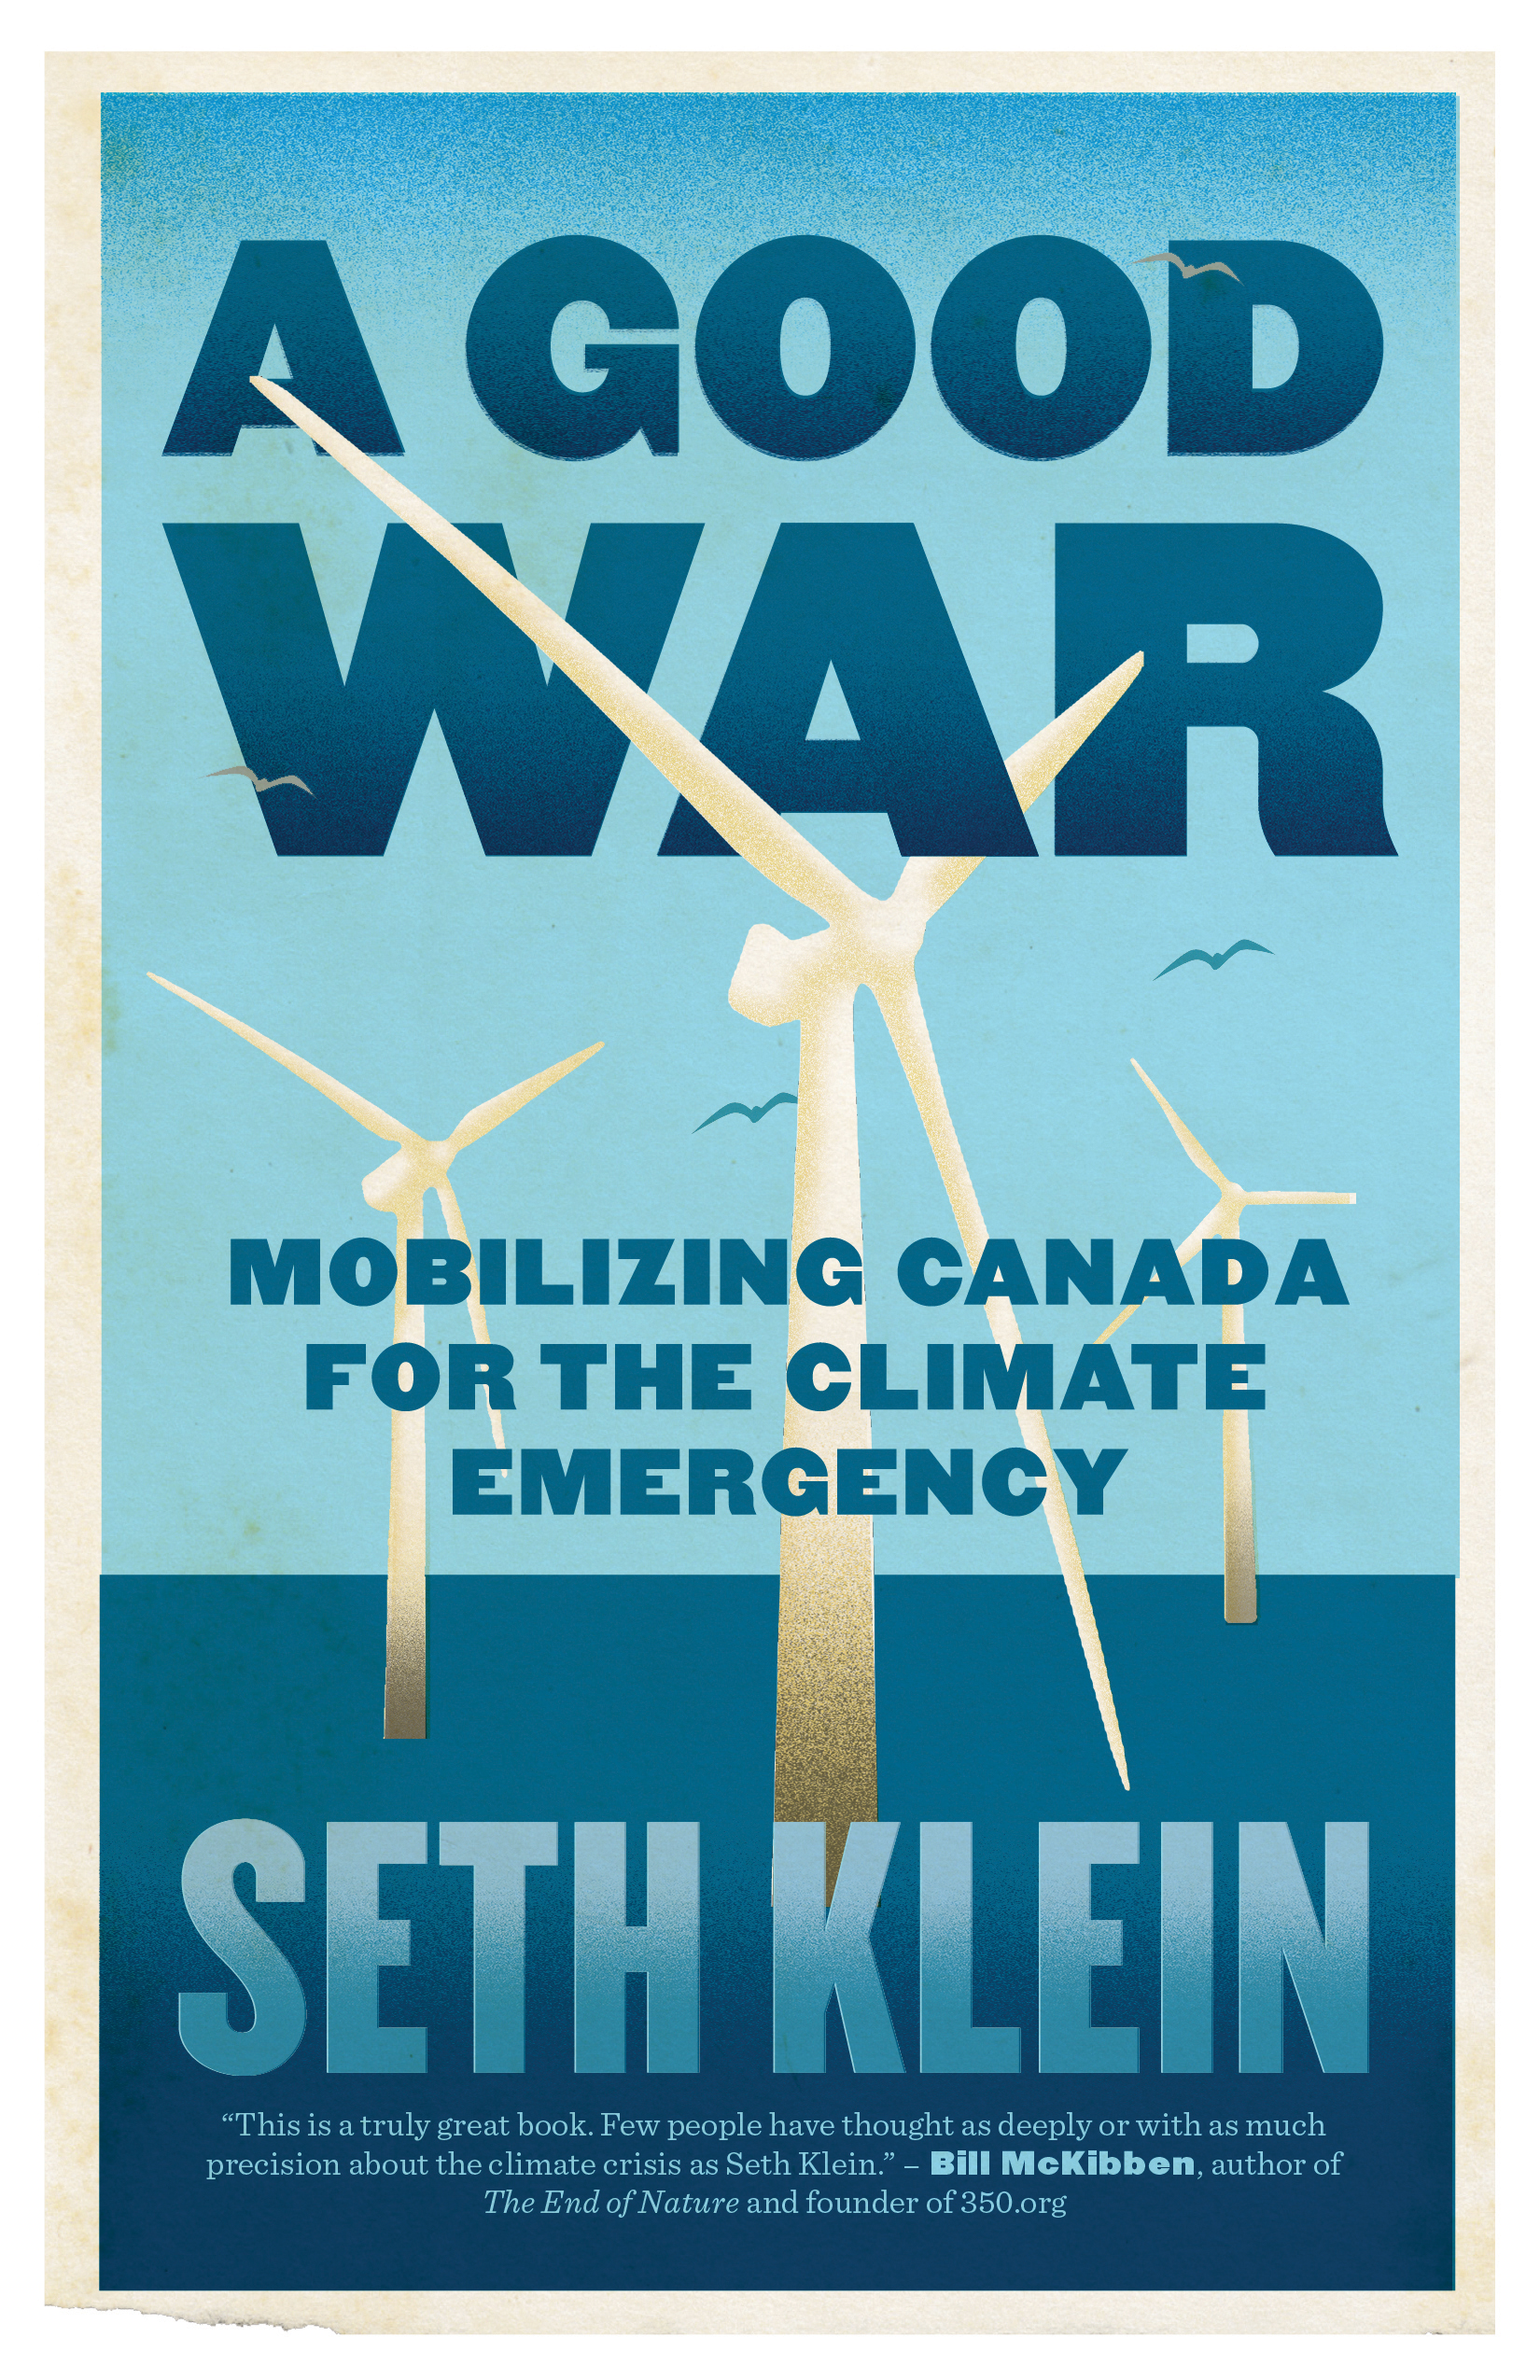 A Good War Mobilizing Canada For The Climate Emergency by Seth Klein